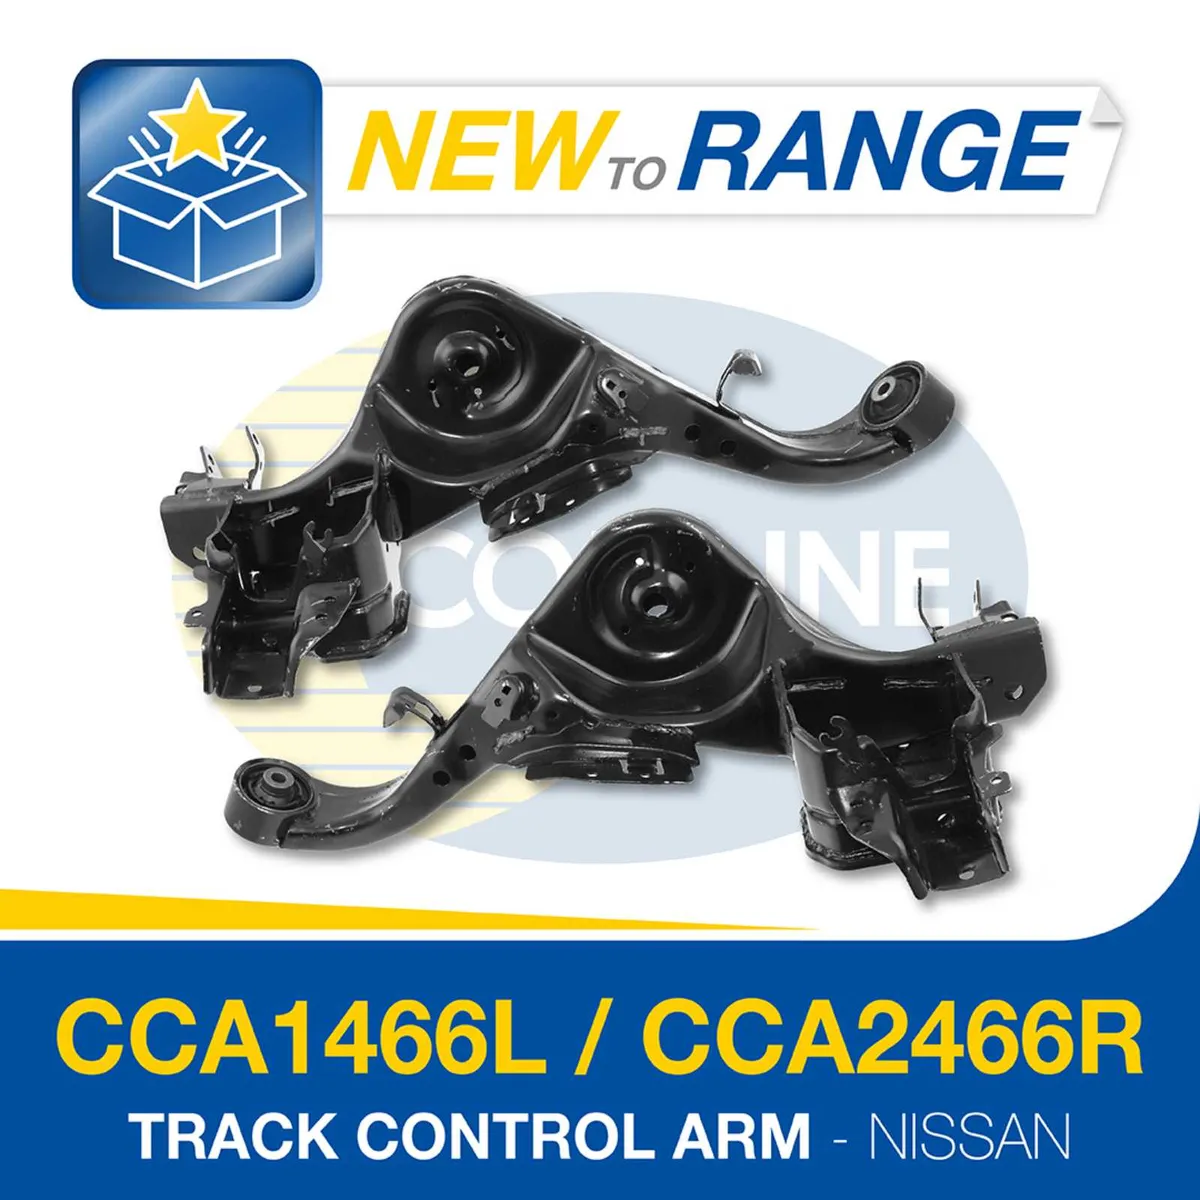 Nissan Rear Trailing Arms